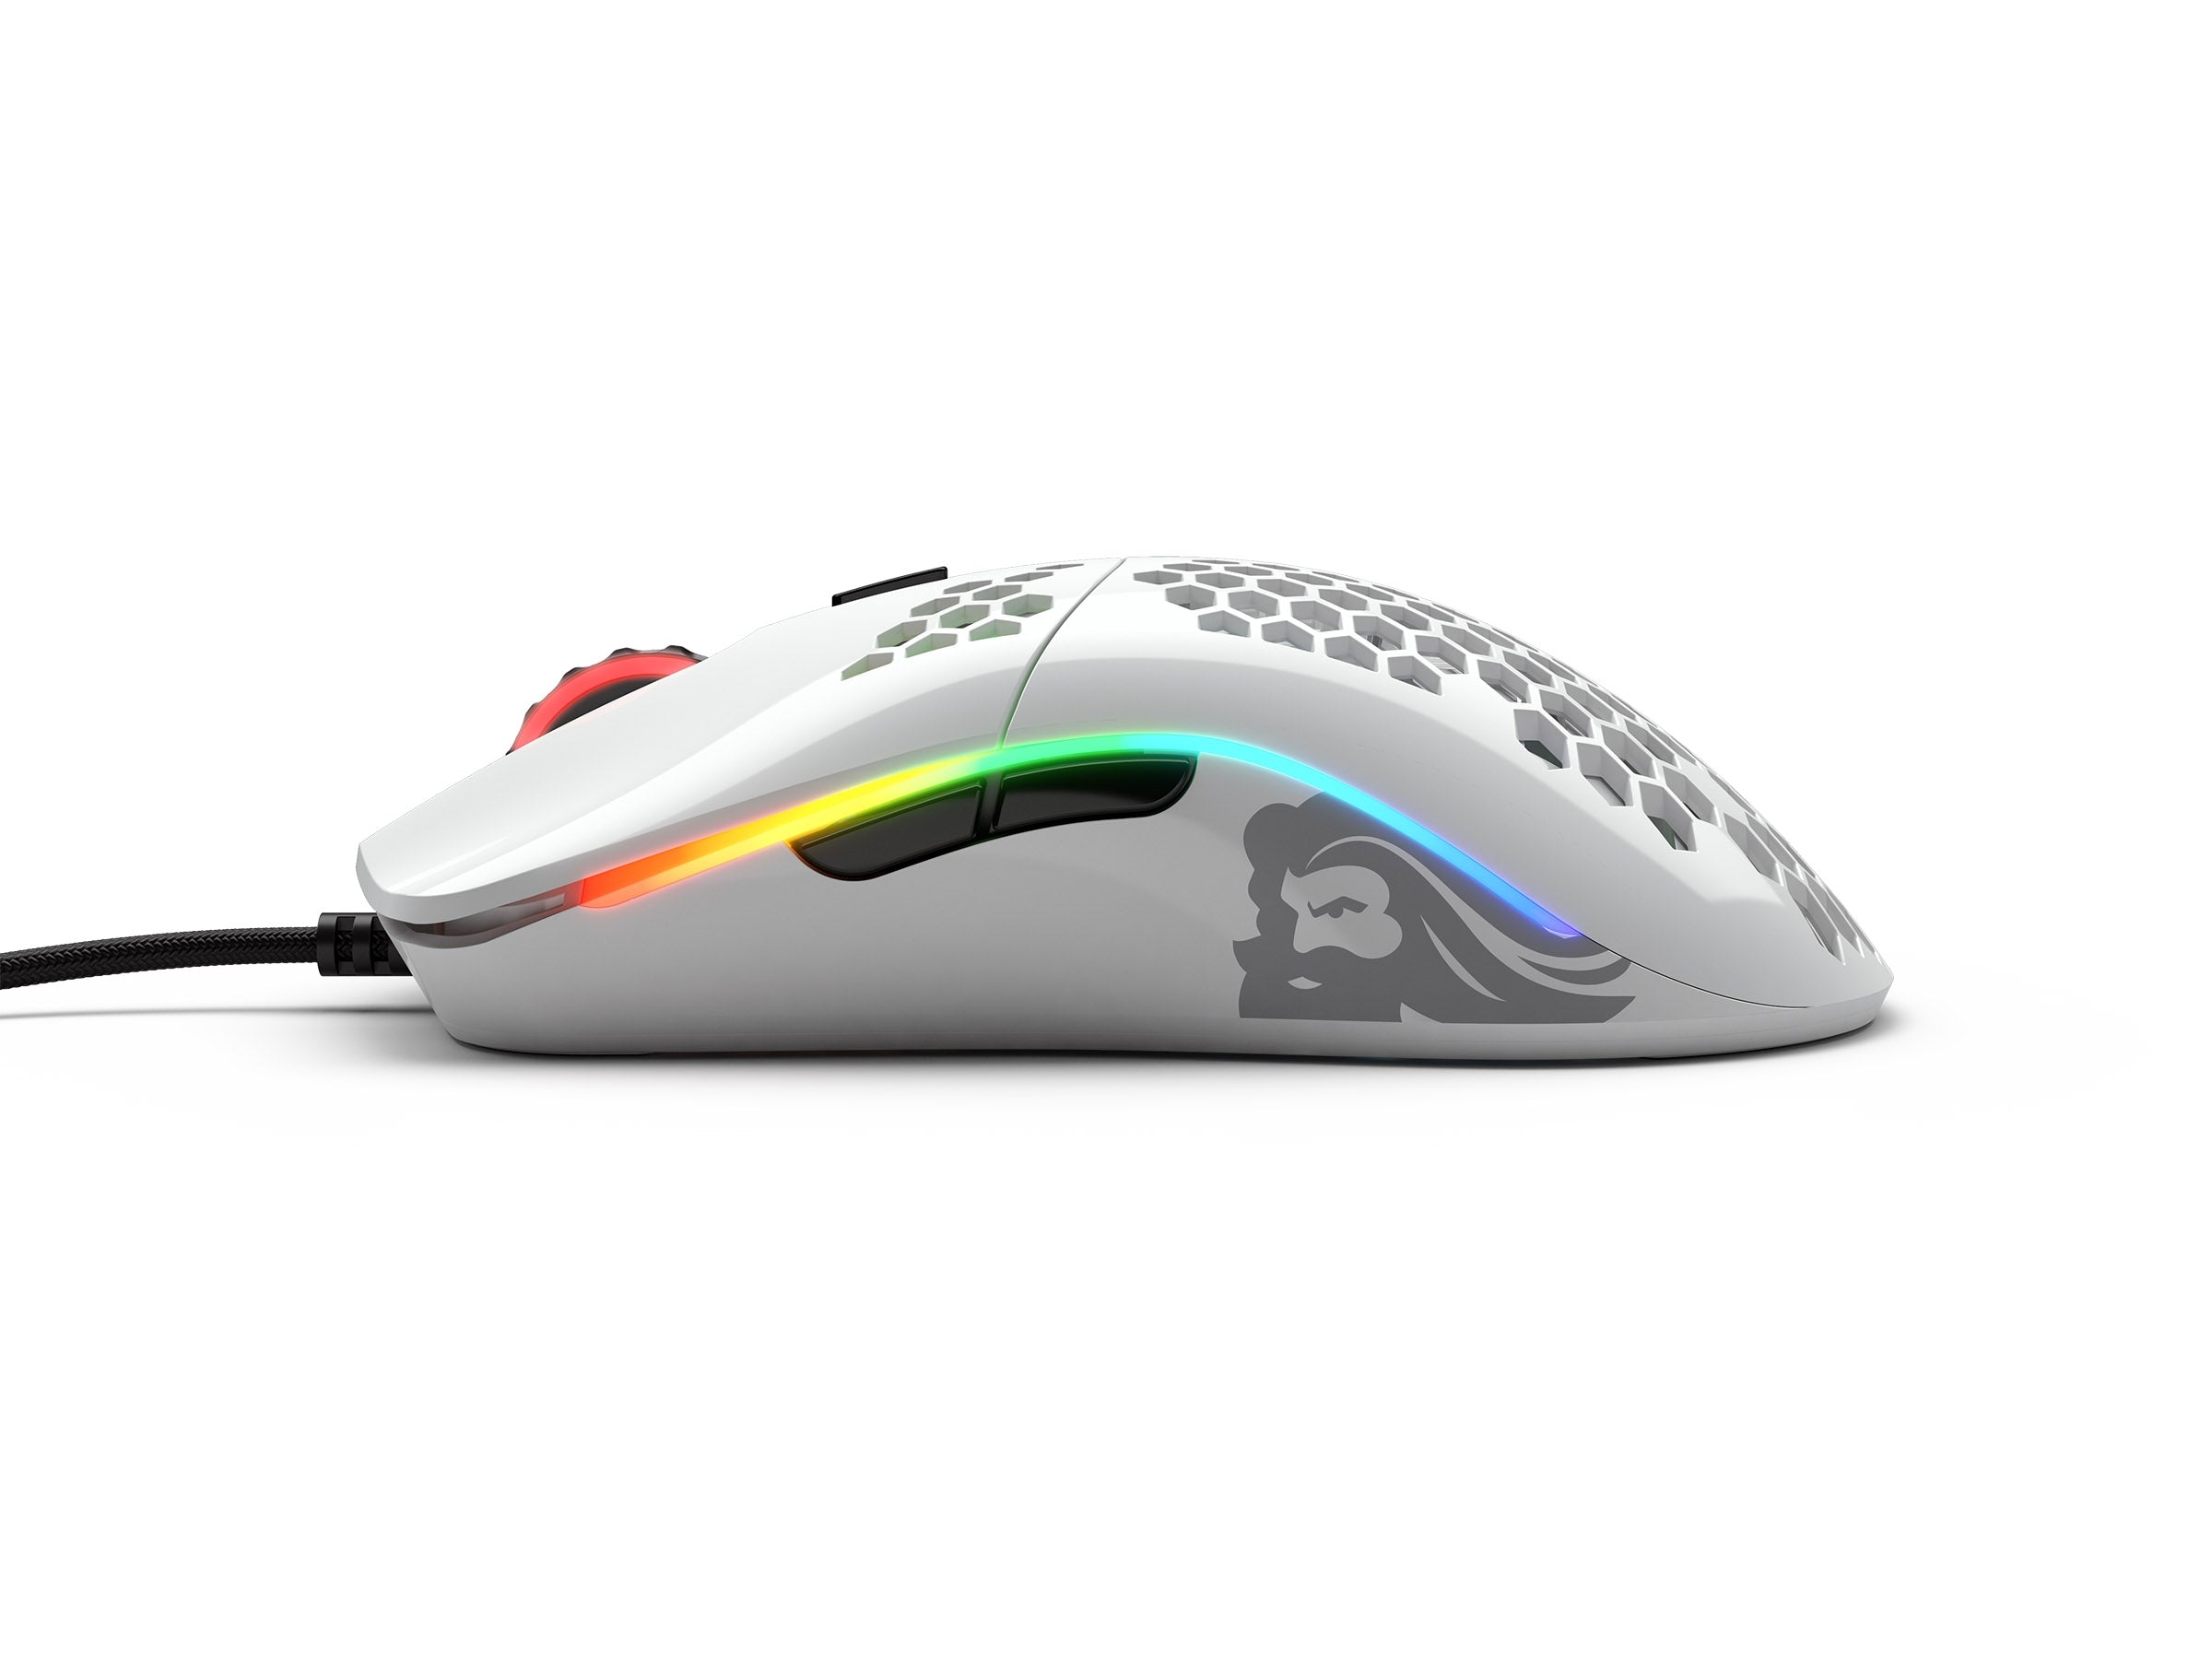 Glorious PC Model O Glossy White Lightweight Gaming Mouse MKZ6RAROY0 |27476|